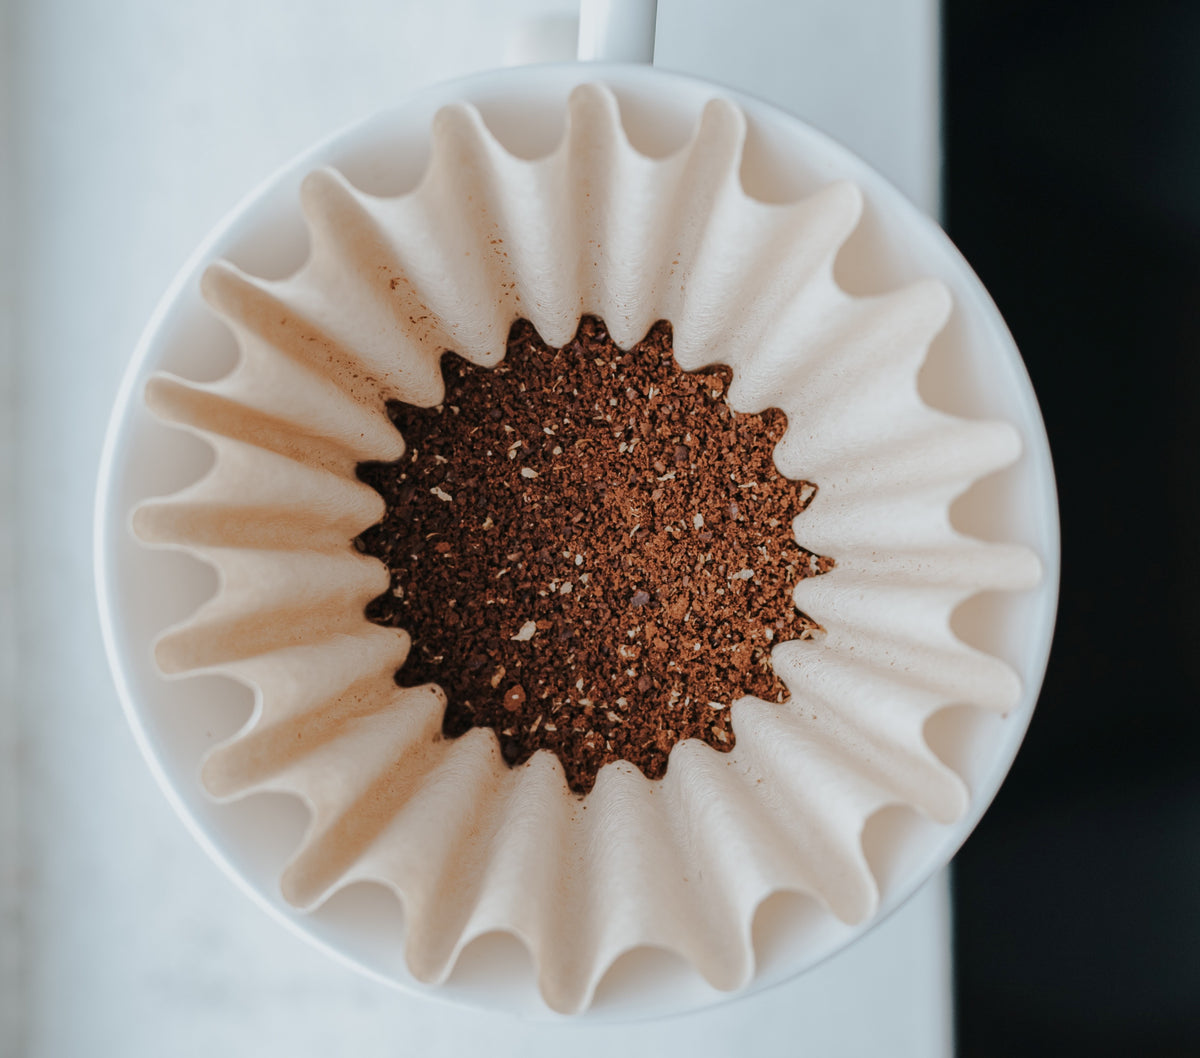 Do Different Materials Affect The Flavour Of Your Coffee? - Perfect Daily  Grind